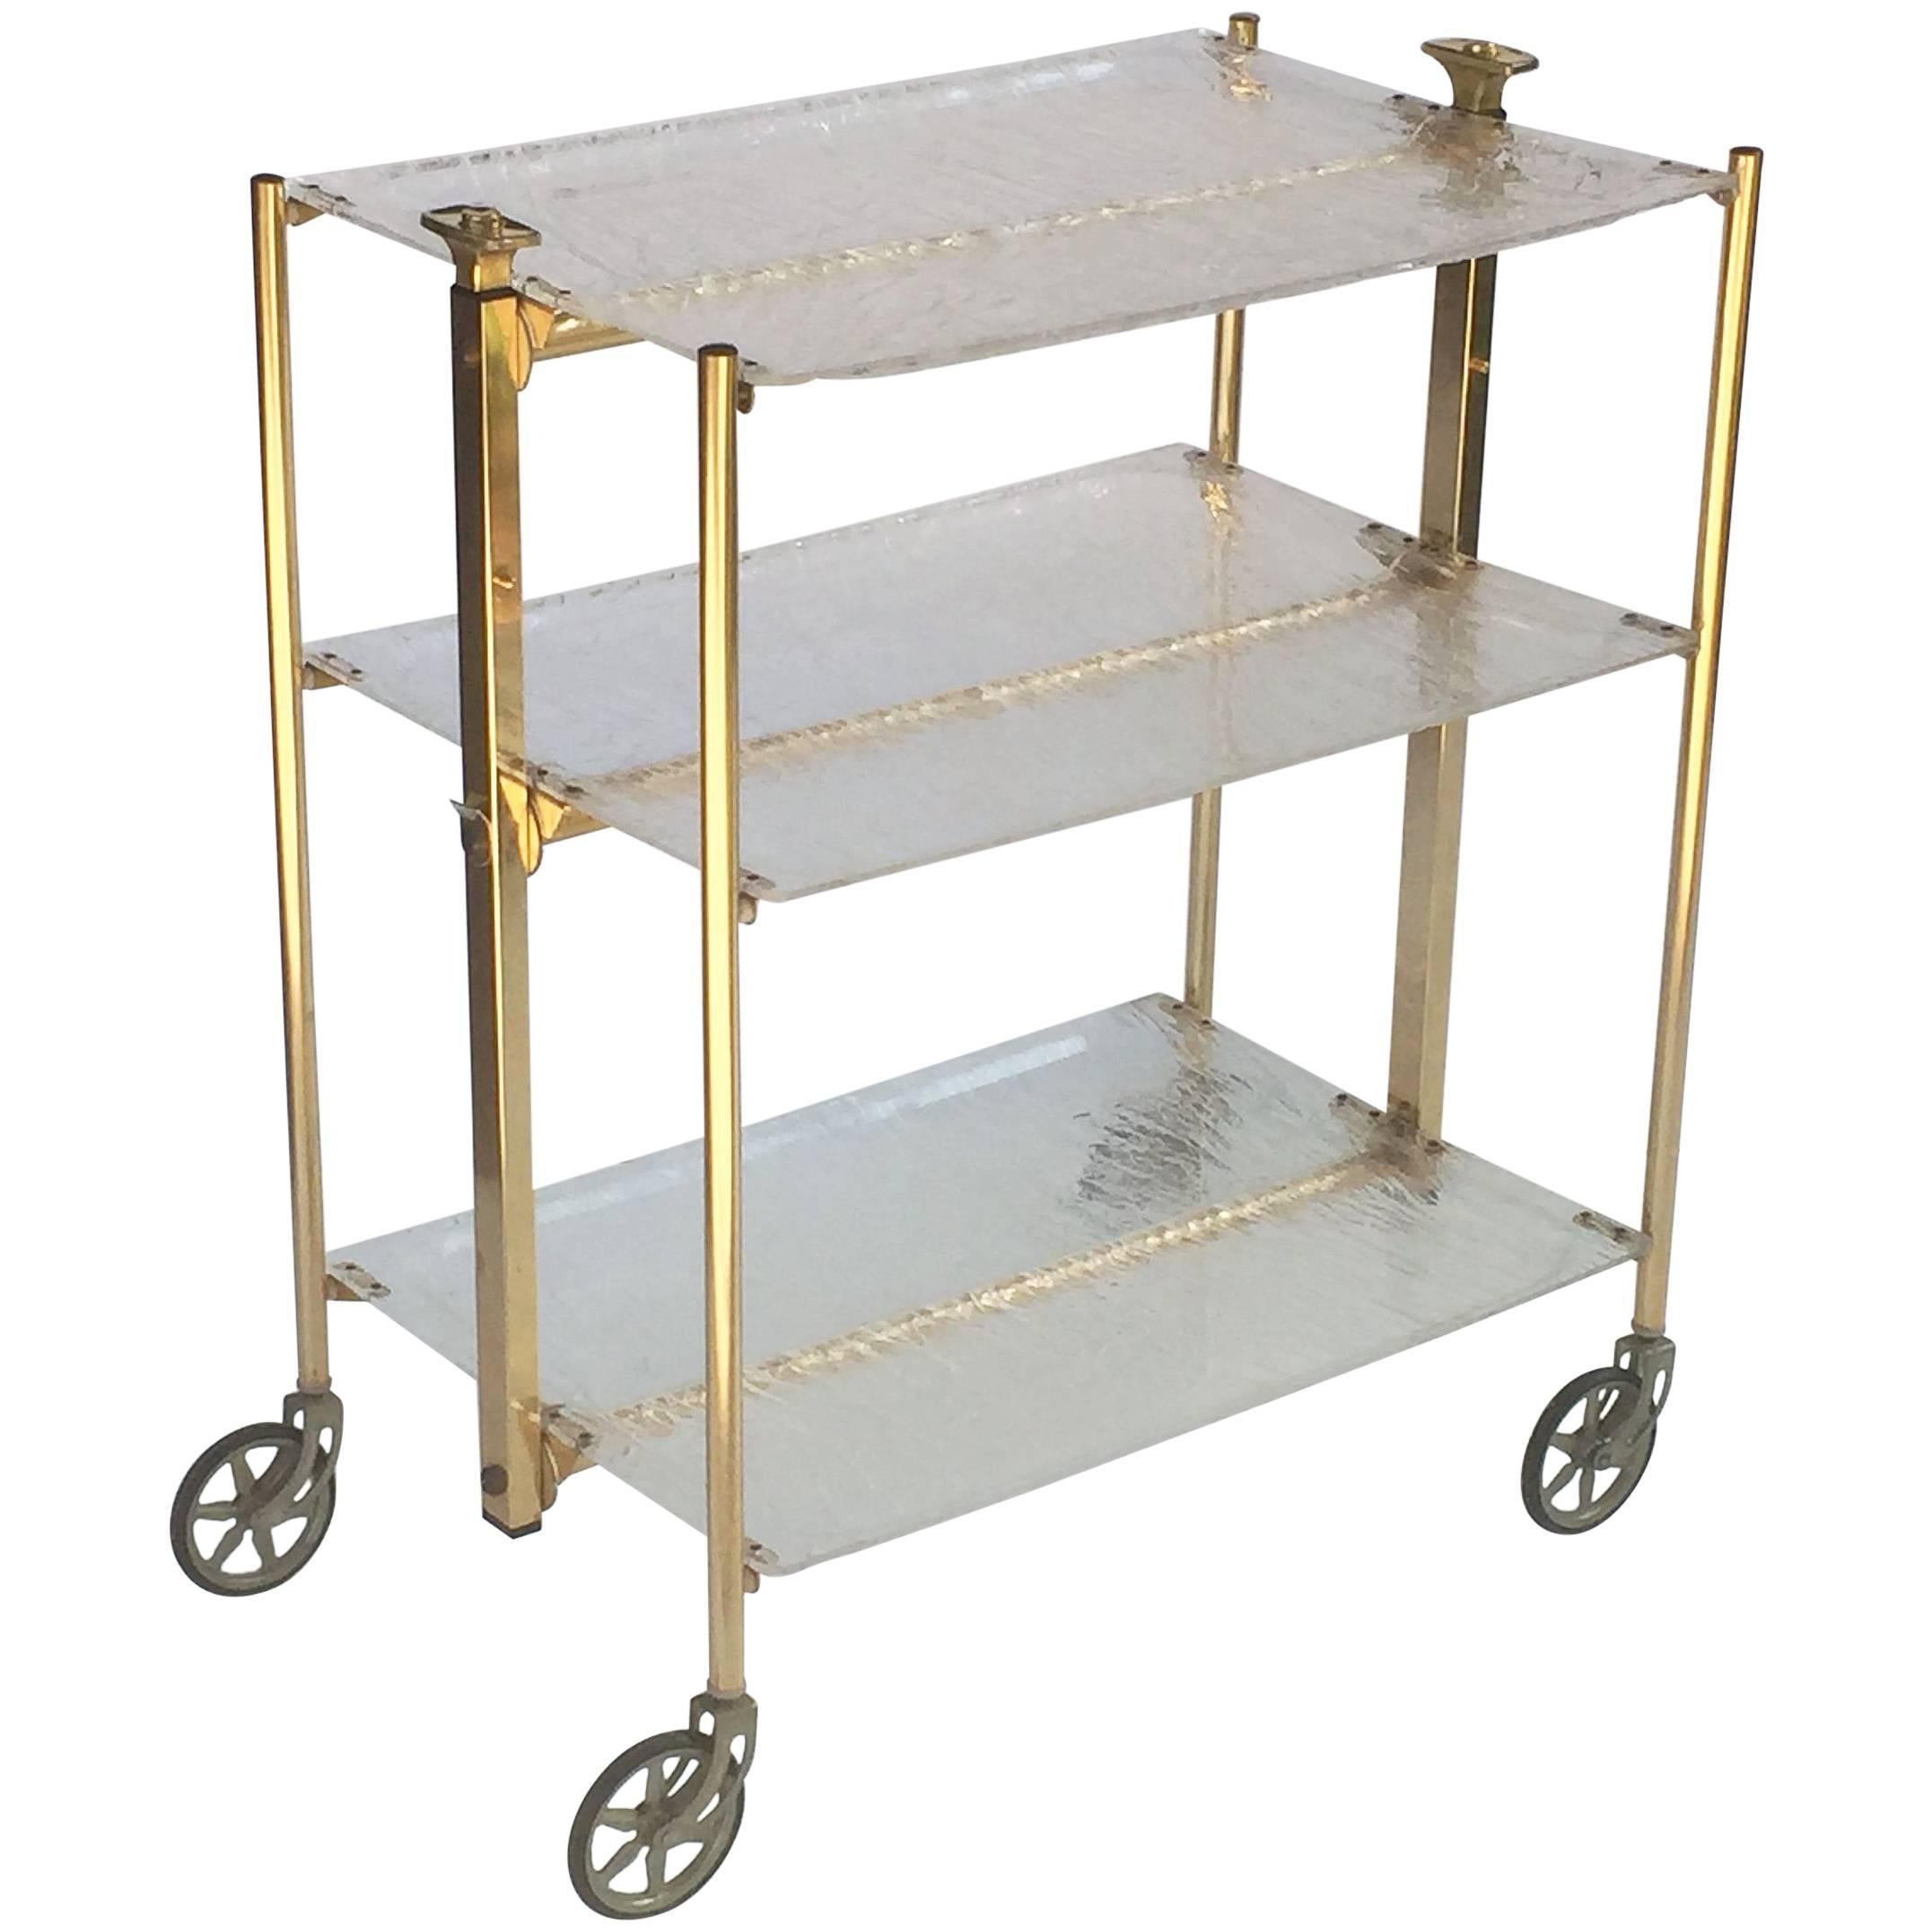 What is a drinks trolley called?